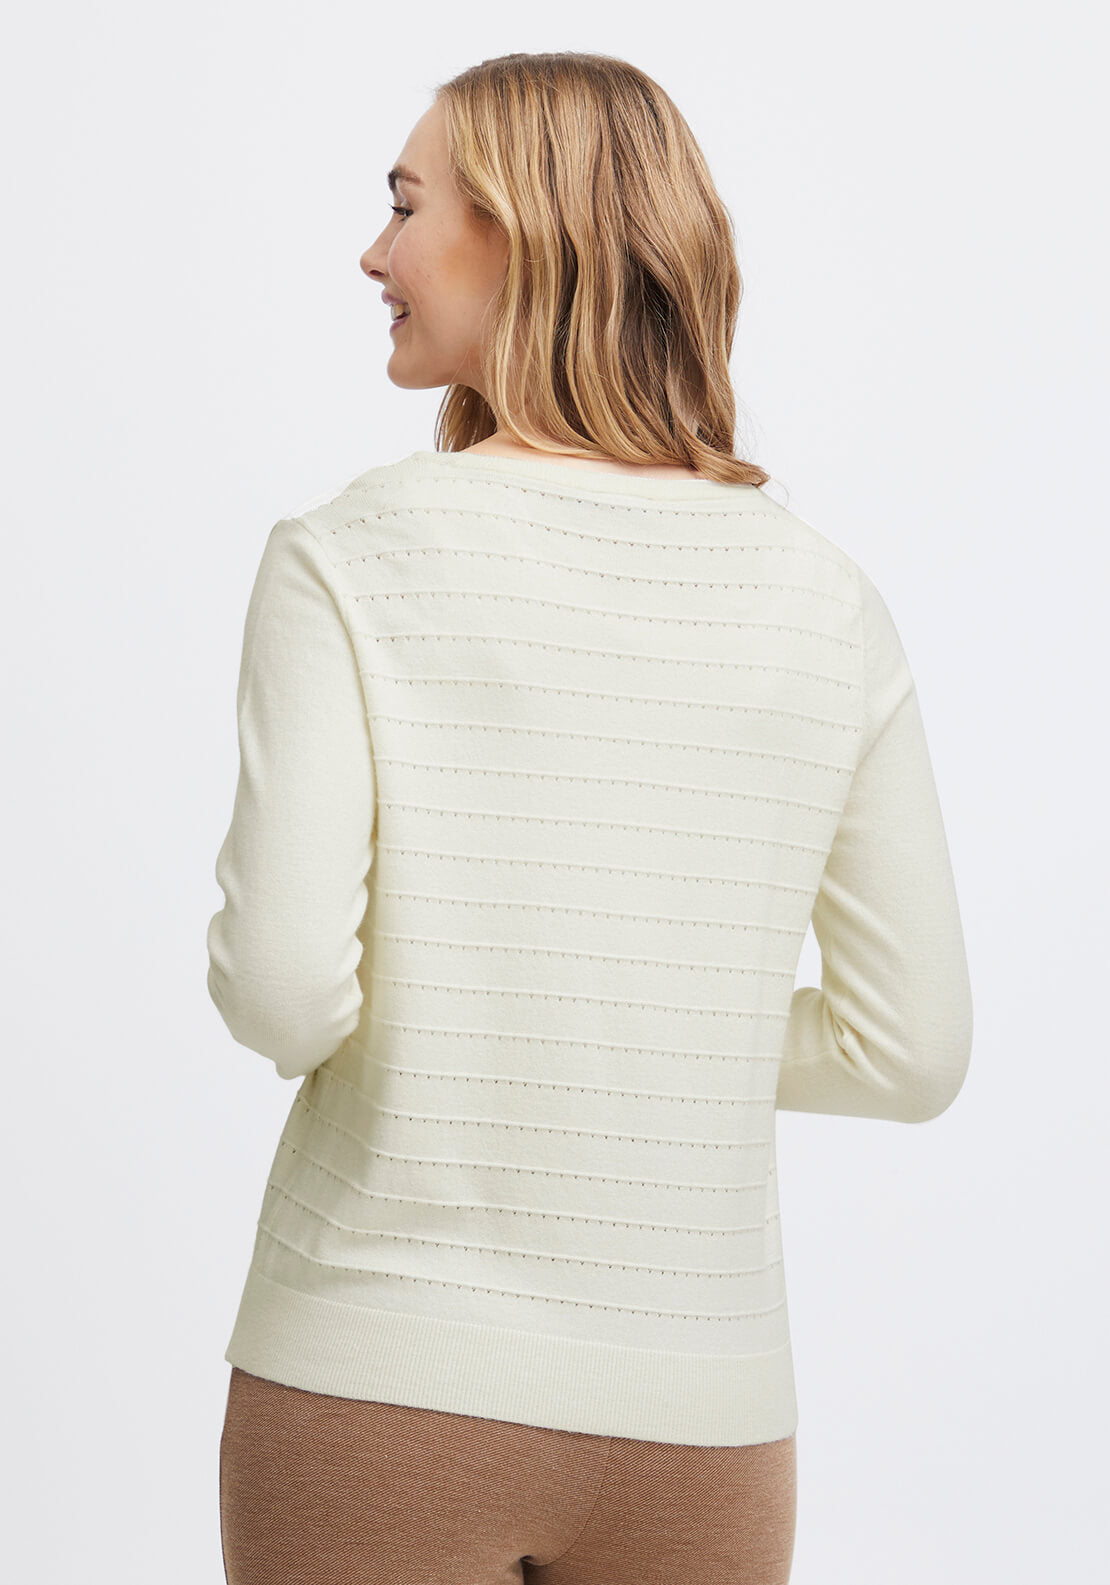 Fransa Knit Pullover 3 Shaws Department Stores